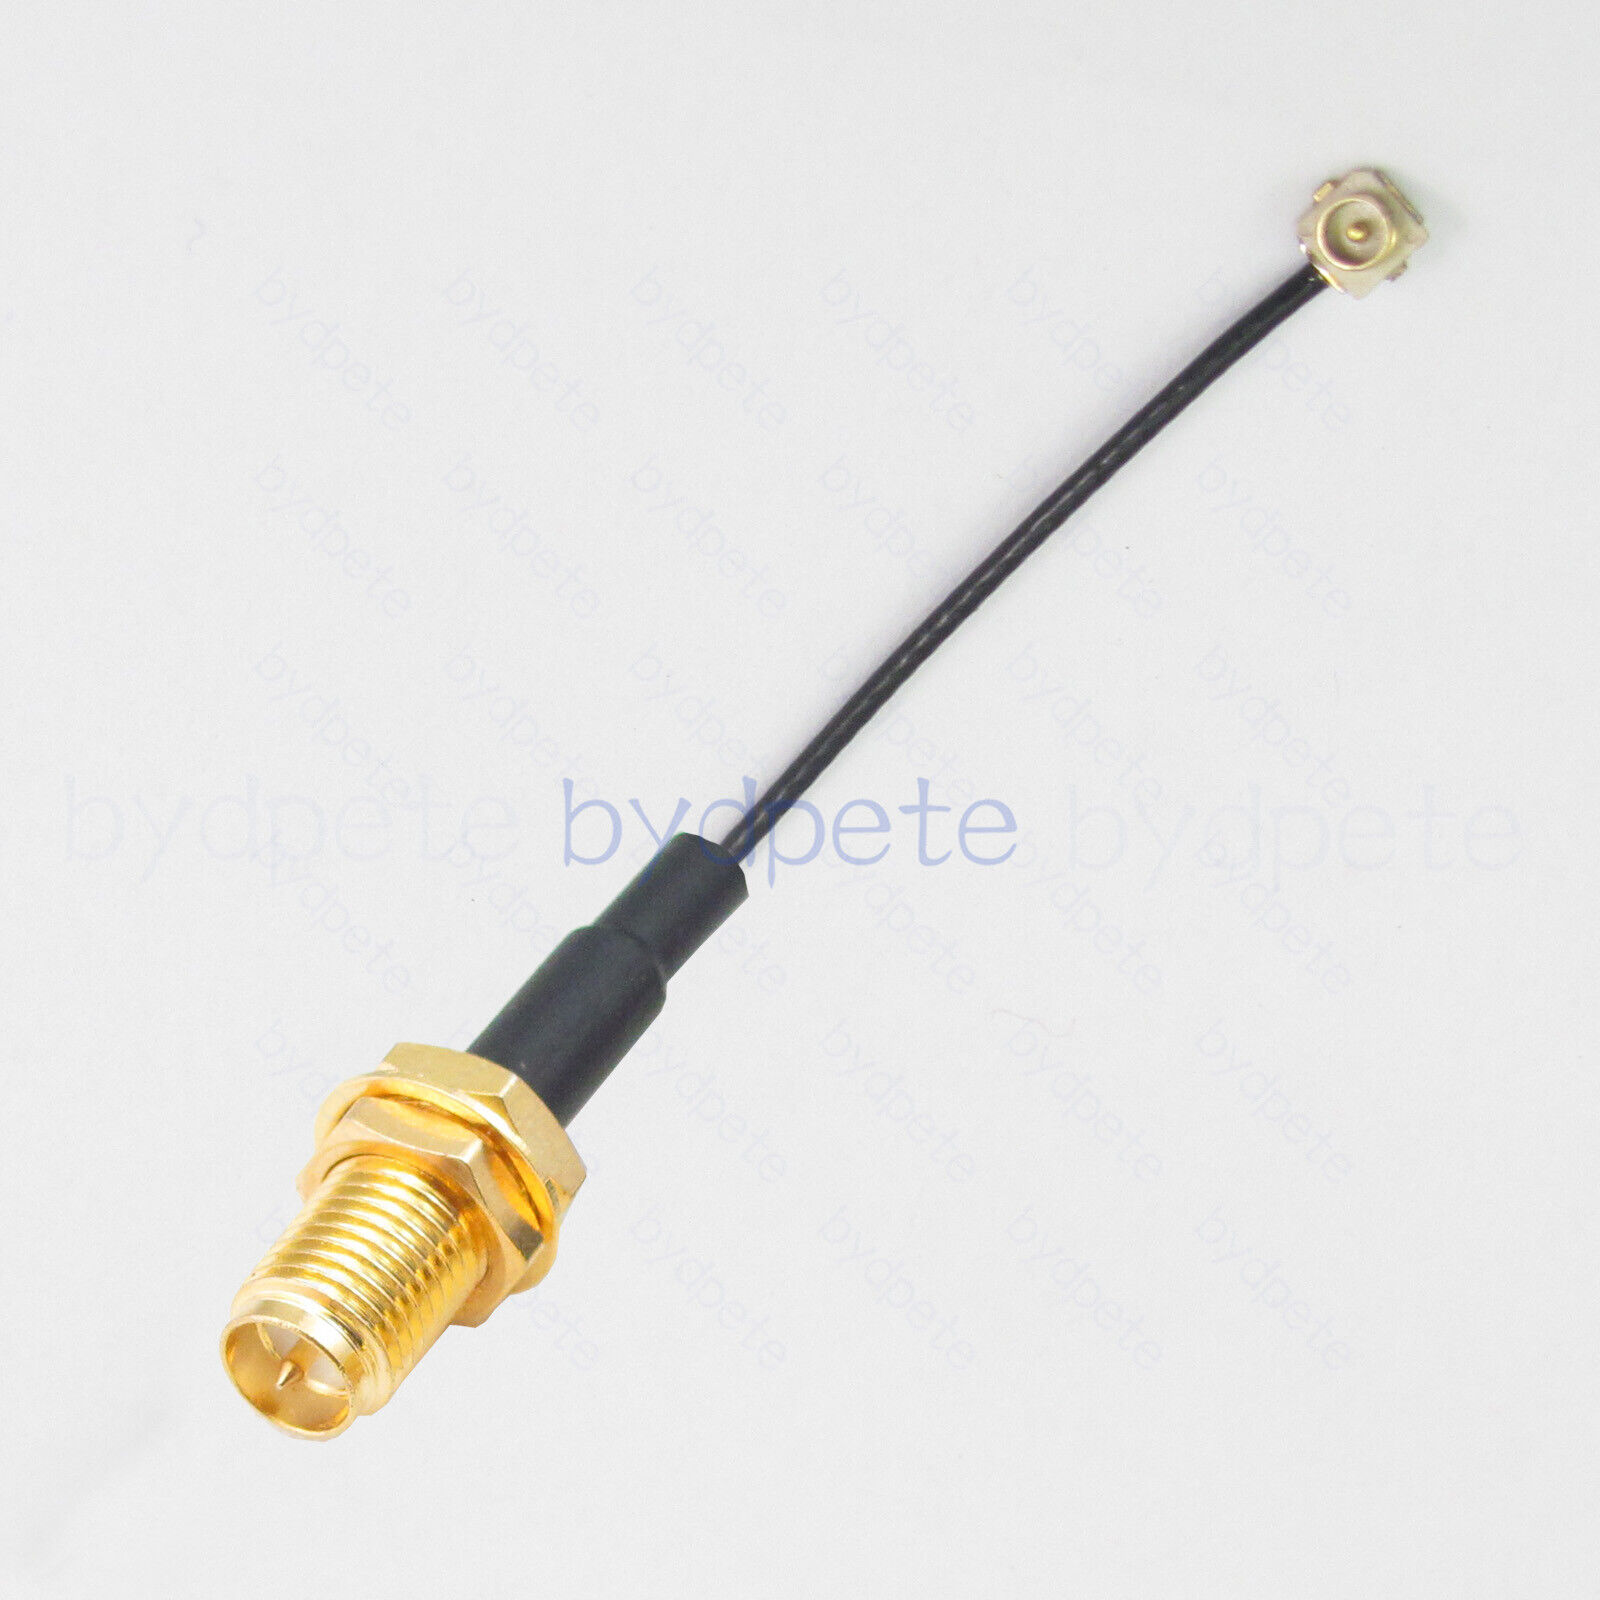 IPX male pin connector to RP-SMA female 1.13mm Coaxial Pigtail cable IPEX 50ohm